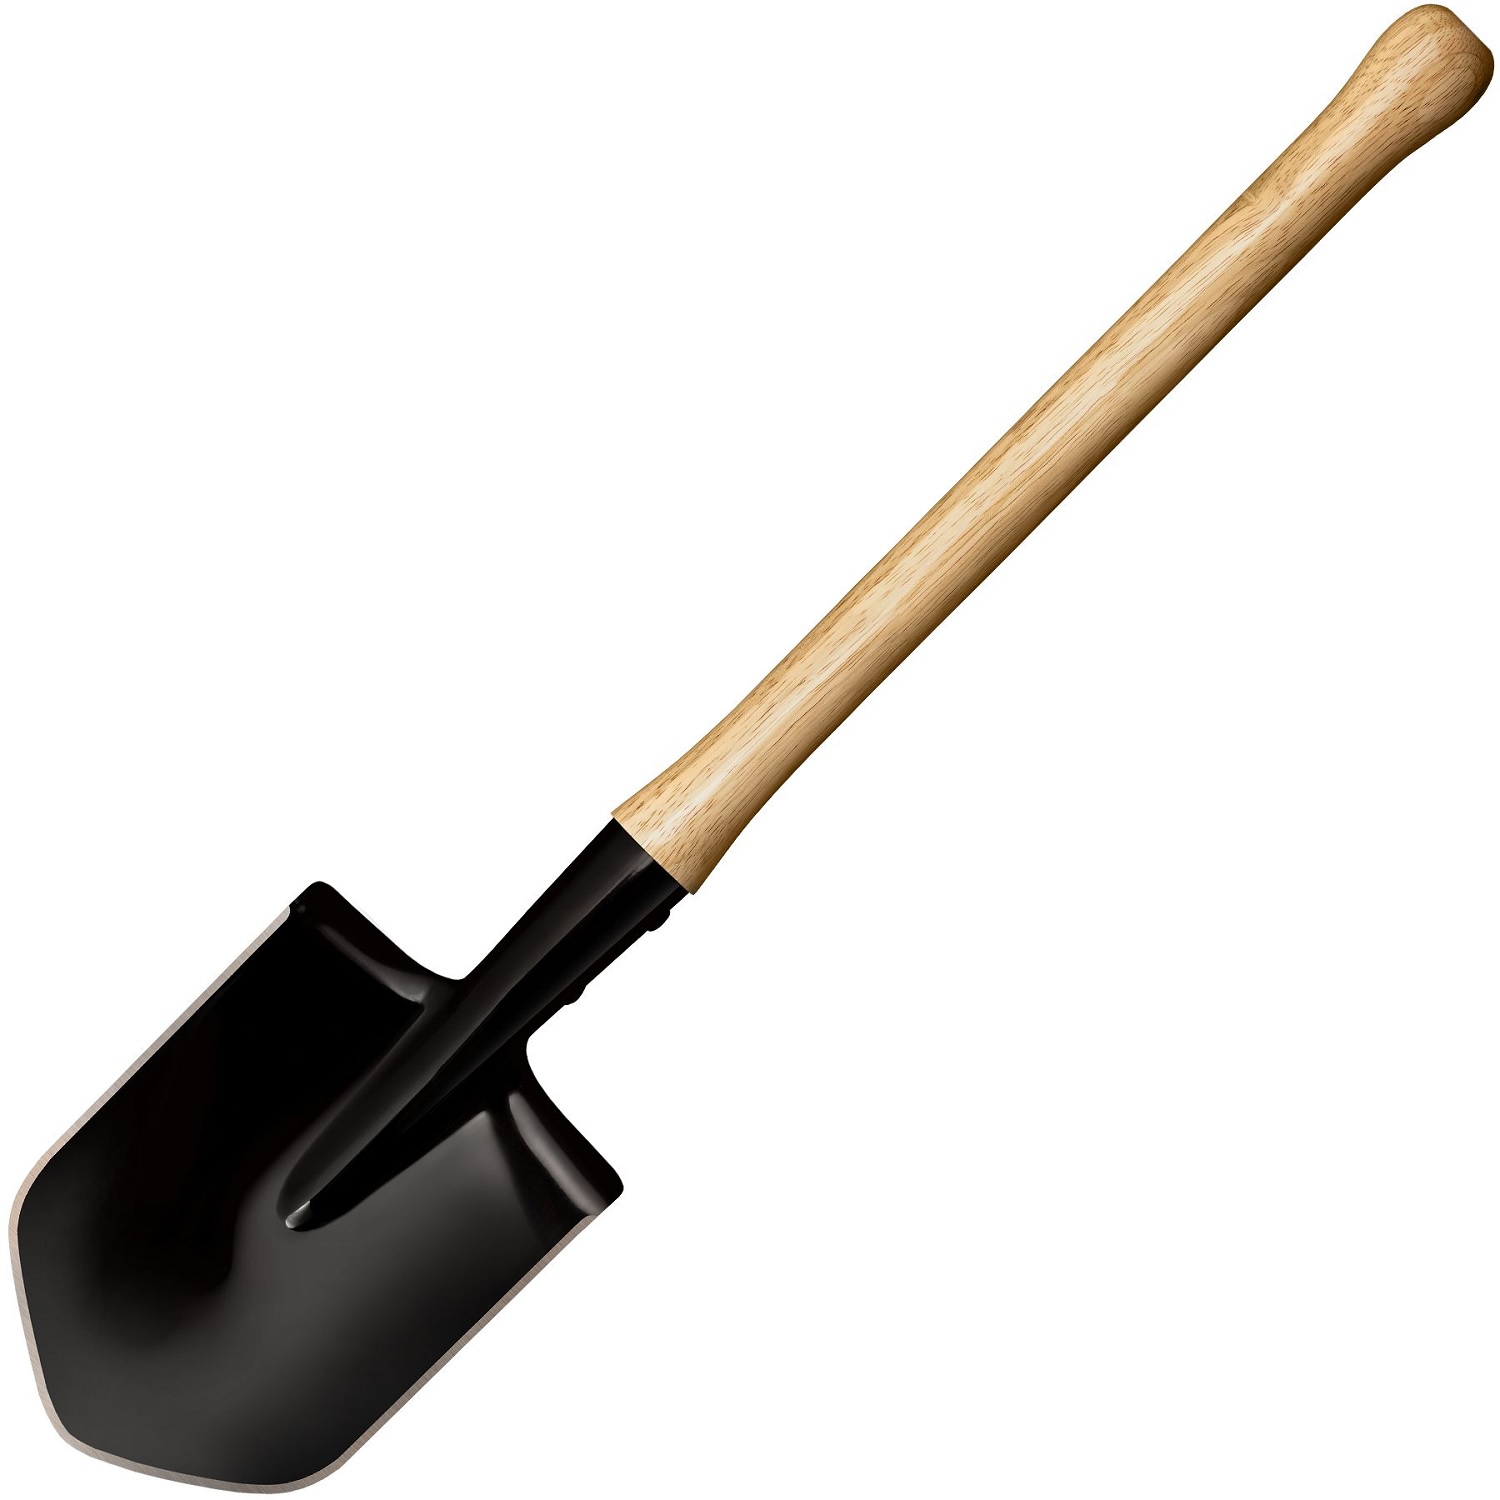 Cold Steel Spetsnaz Trench Shovel 30 in Overall Length